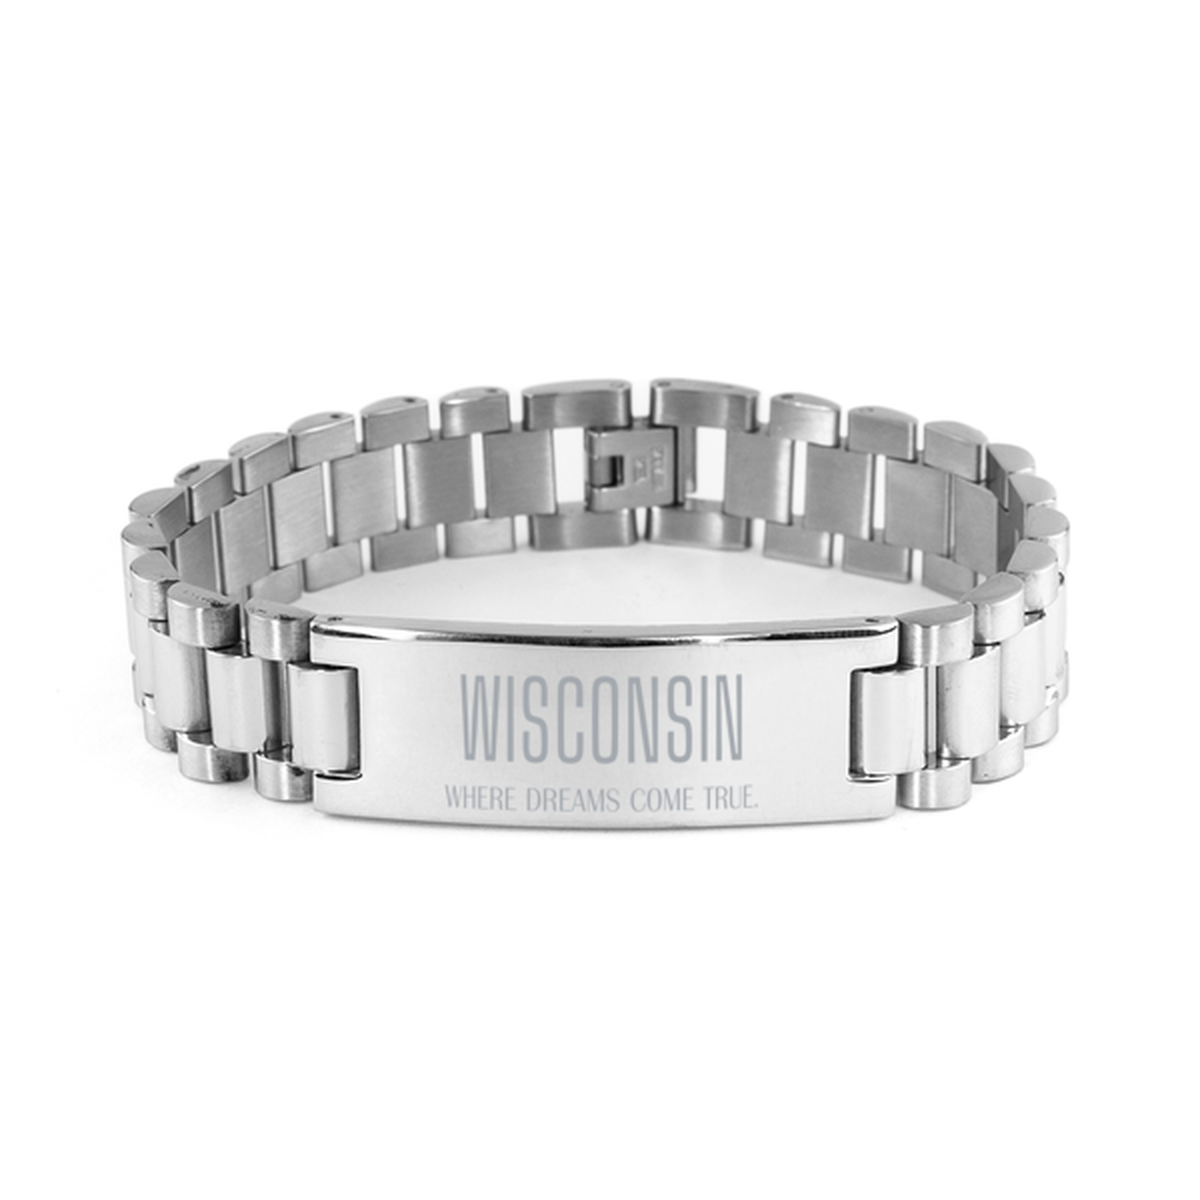 Love Wisconsin State Ladder Stainless Steel Bracelet, Wisconsin Where dreams come true, Birthday Inspirational Gifts For Wisconsin Men, Women, Friends